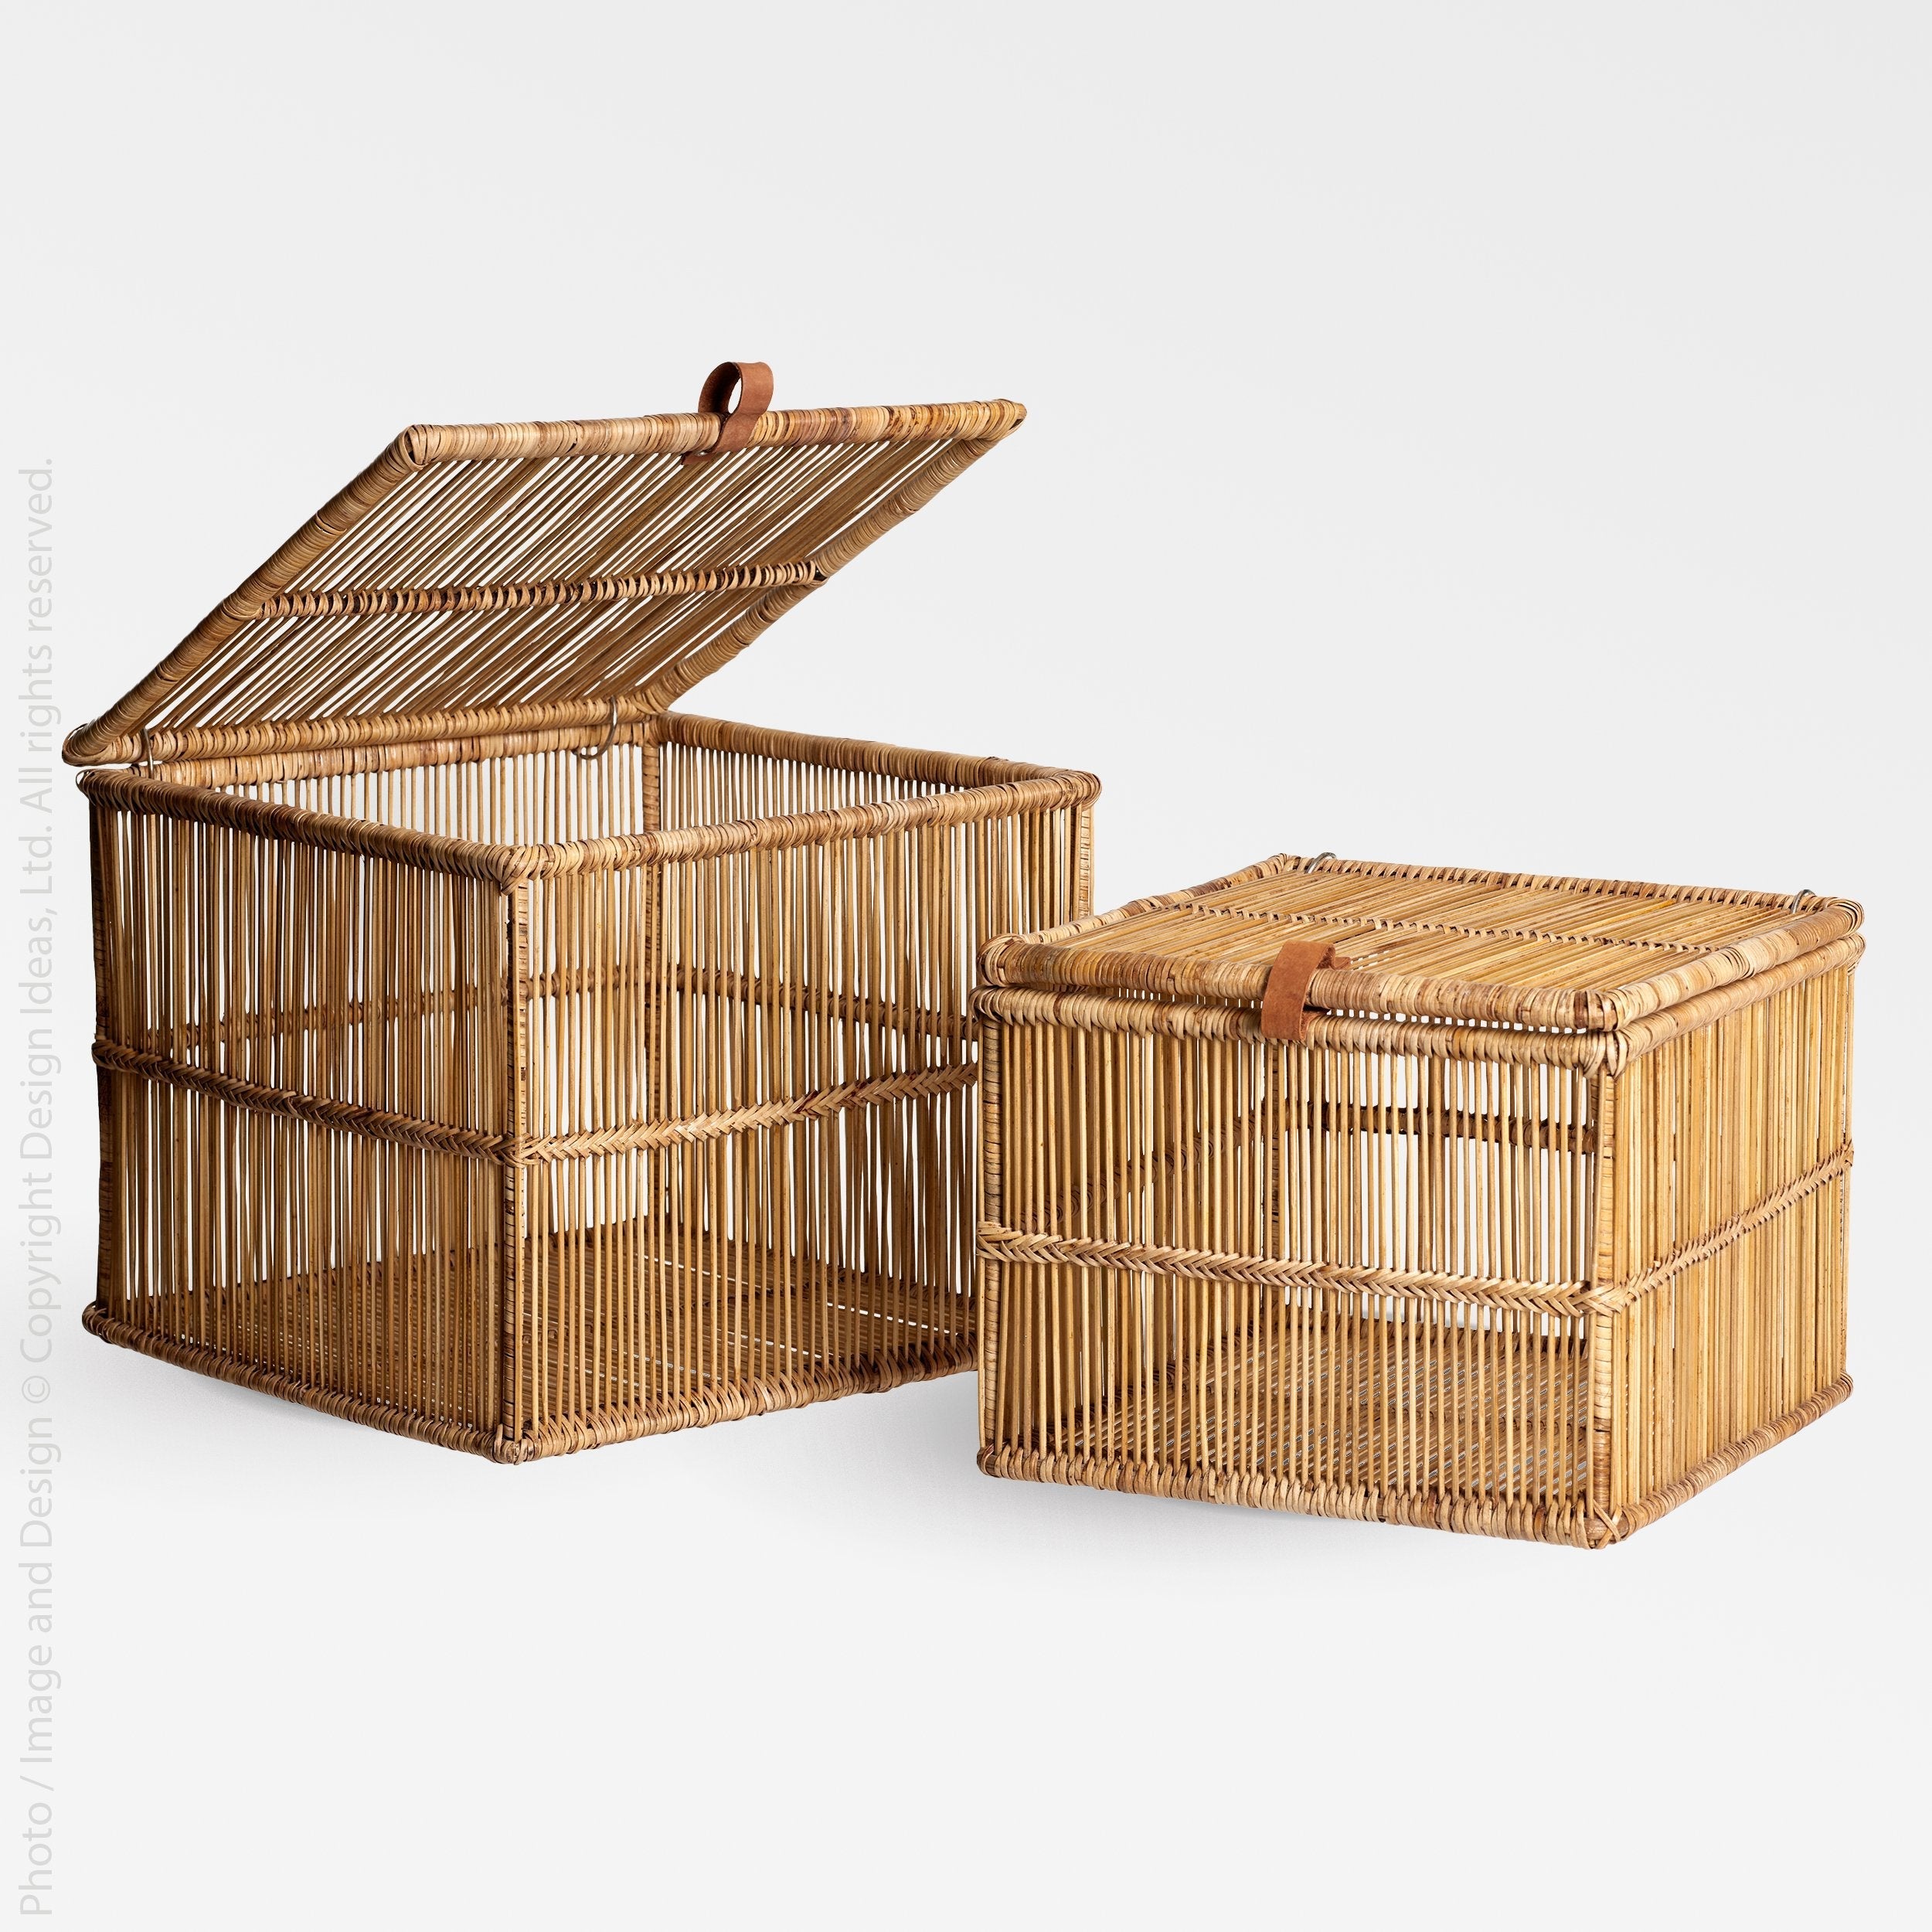 Irawaddy Bamboo Basket Set - Terrazzo Color | Image 1 | From the Irawaddy Collection | Skillfully assembled with natural bamboo for long lasting use | Available in natural color | texxture home